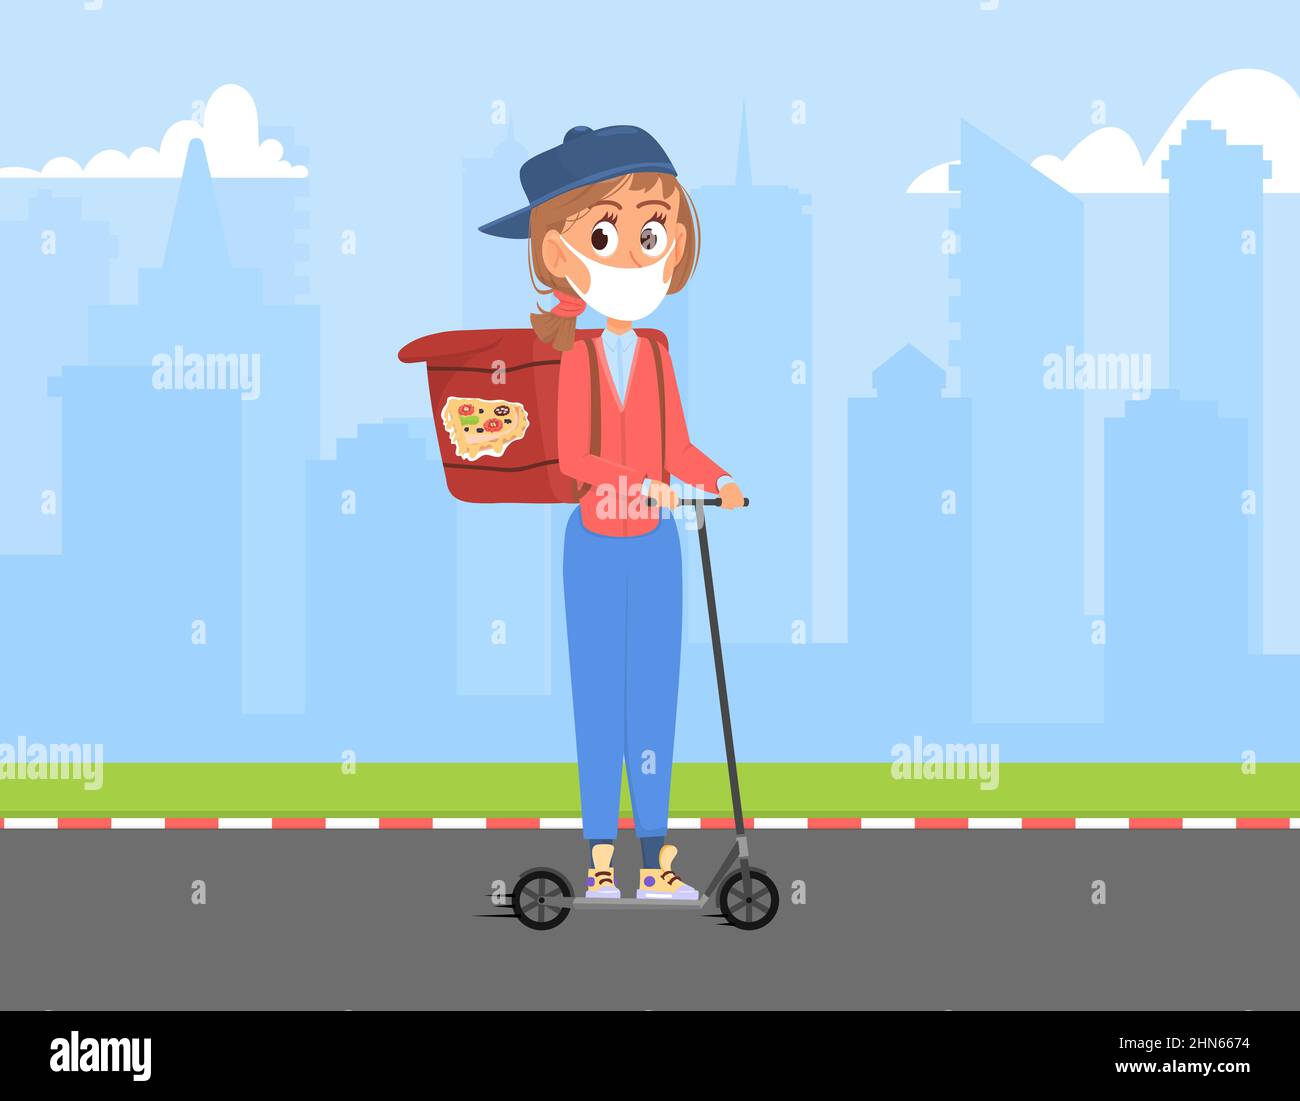 Pizza delivery. Girl with backpack ride on kick scooter with food. Restaurant take away service, cartoon courier in city, decent vector character Stock Vector